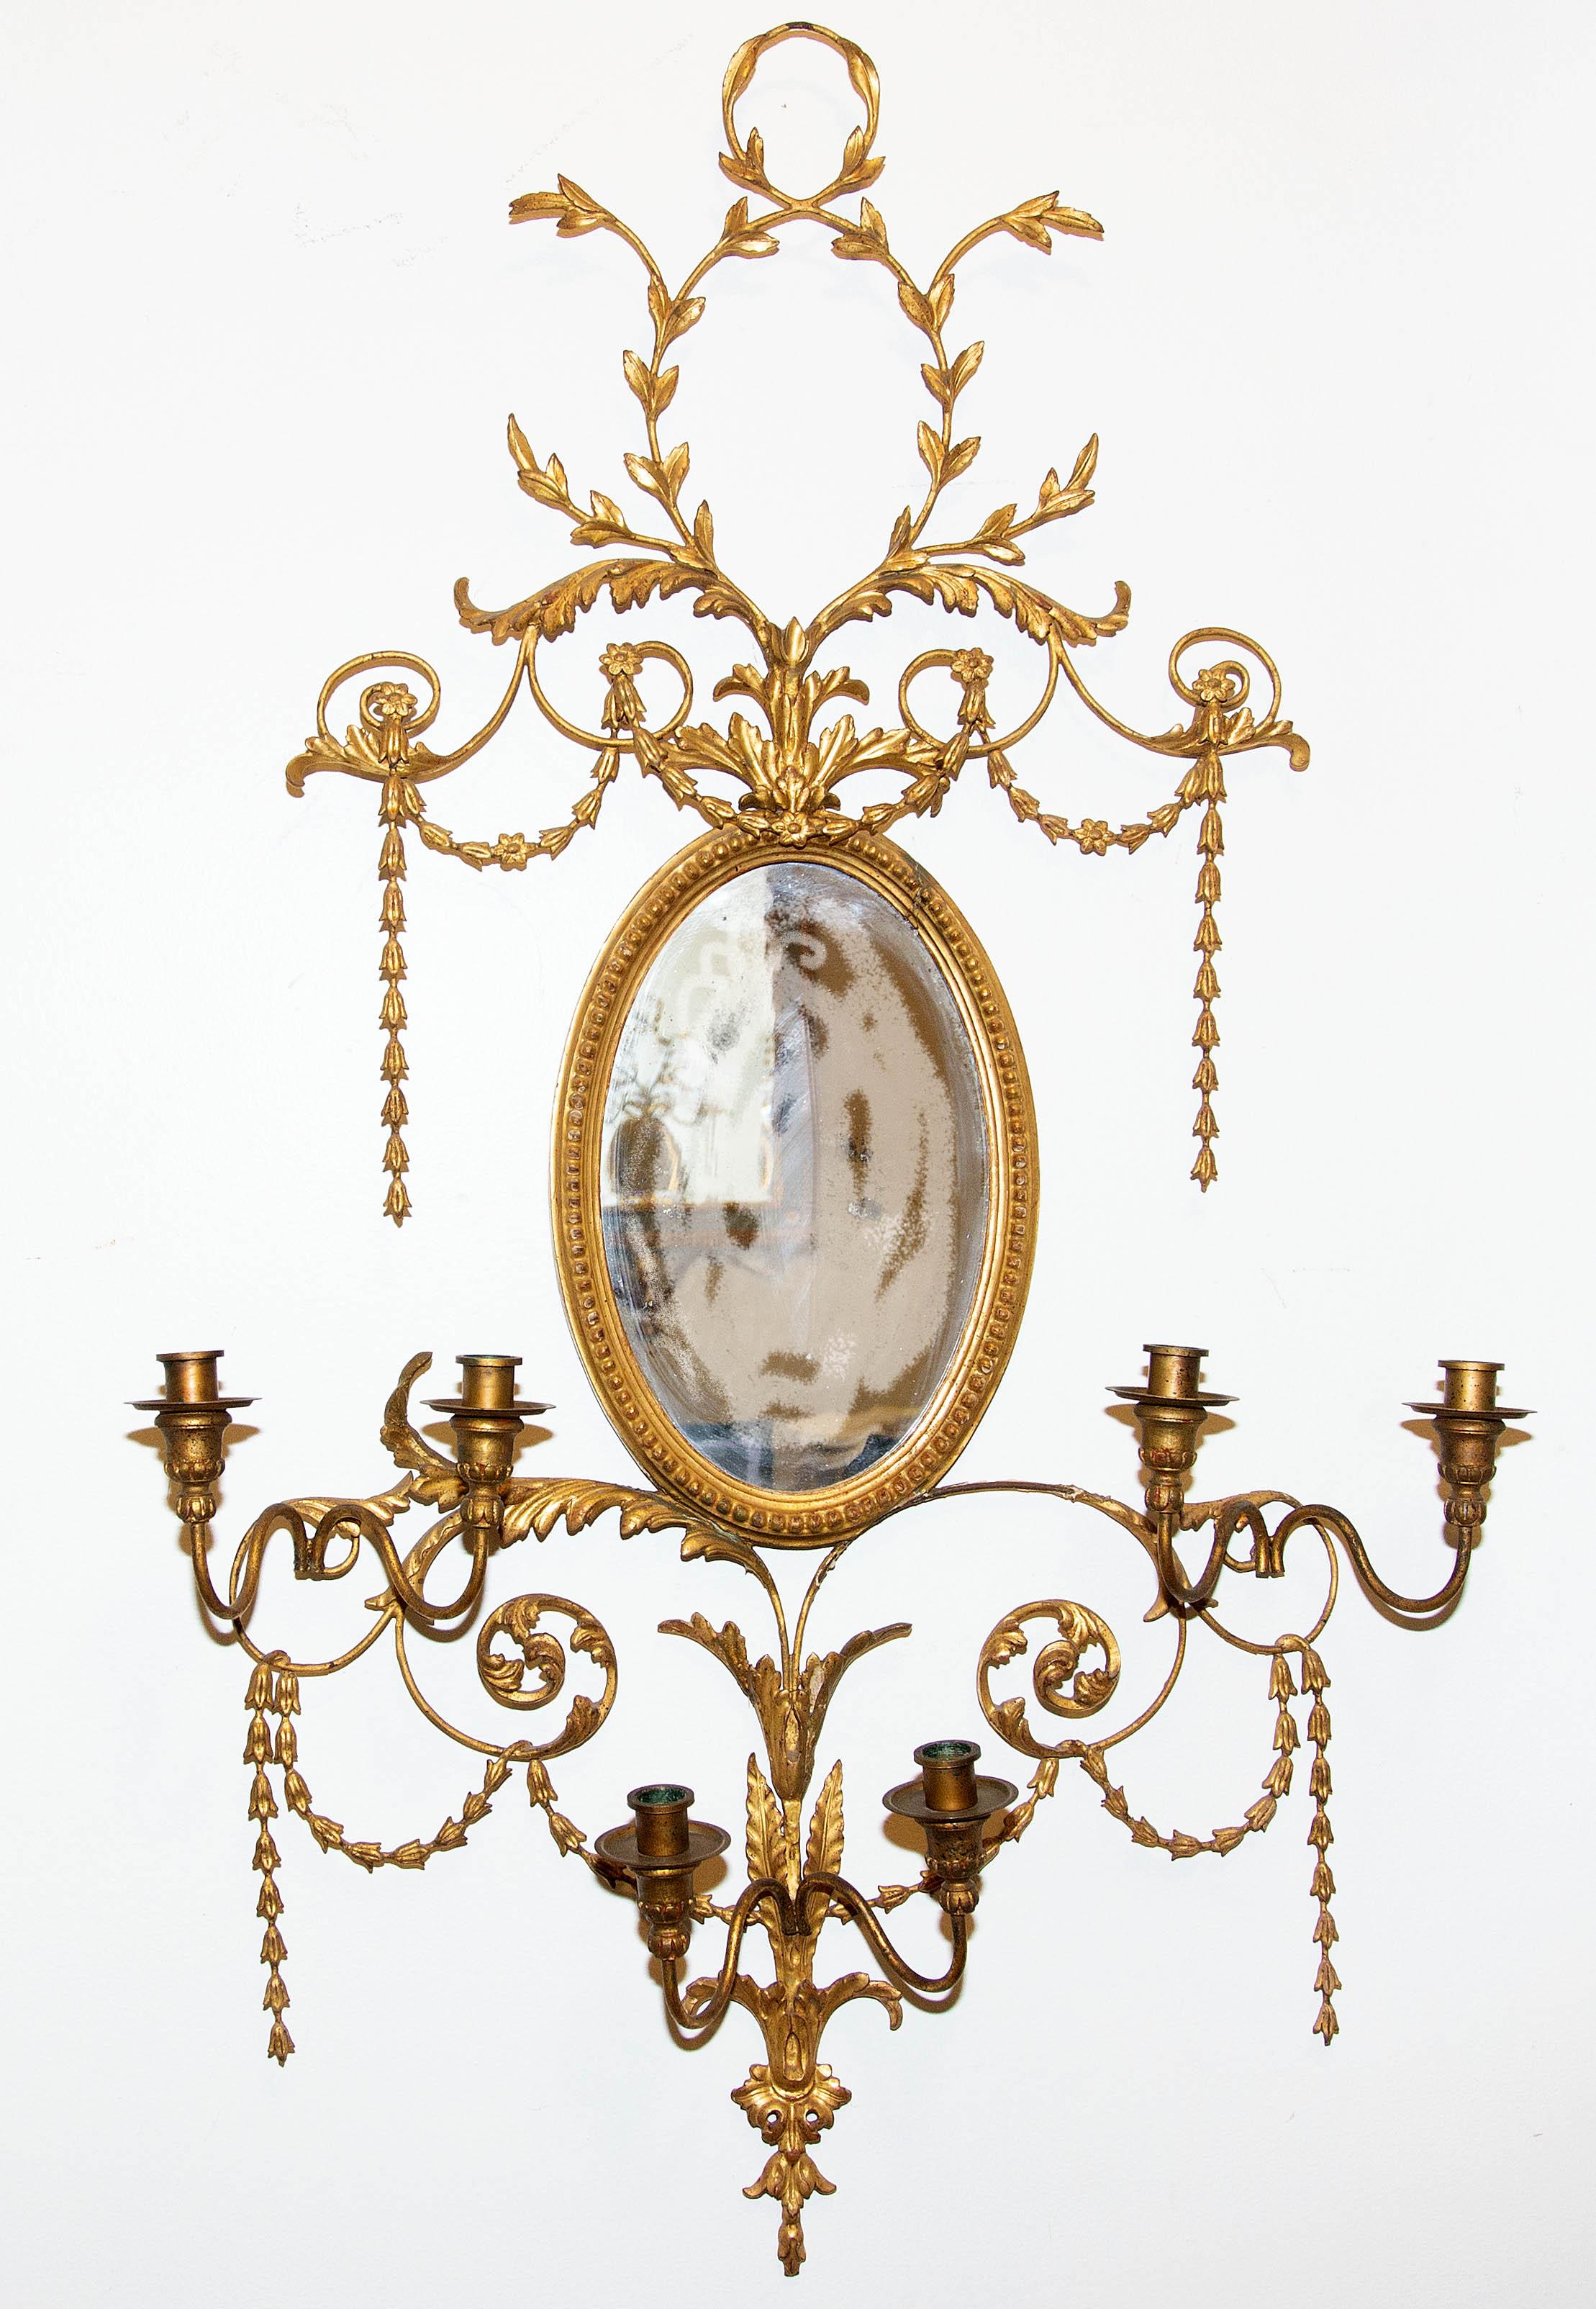 Pair of Adams style gilt mirrors with sconces. Fine quality gilt wall sconces with 6 candle holders. Giltwood and gesso, 19th century.